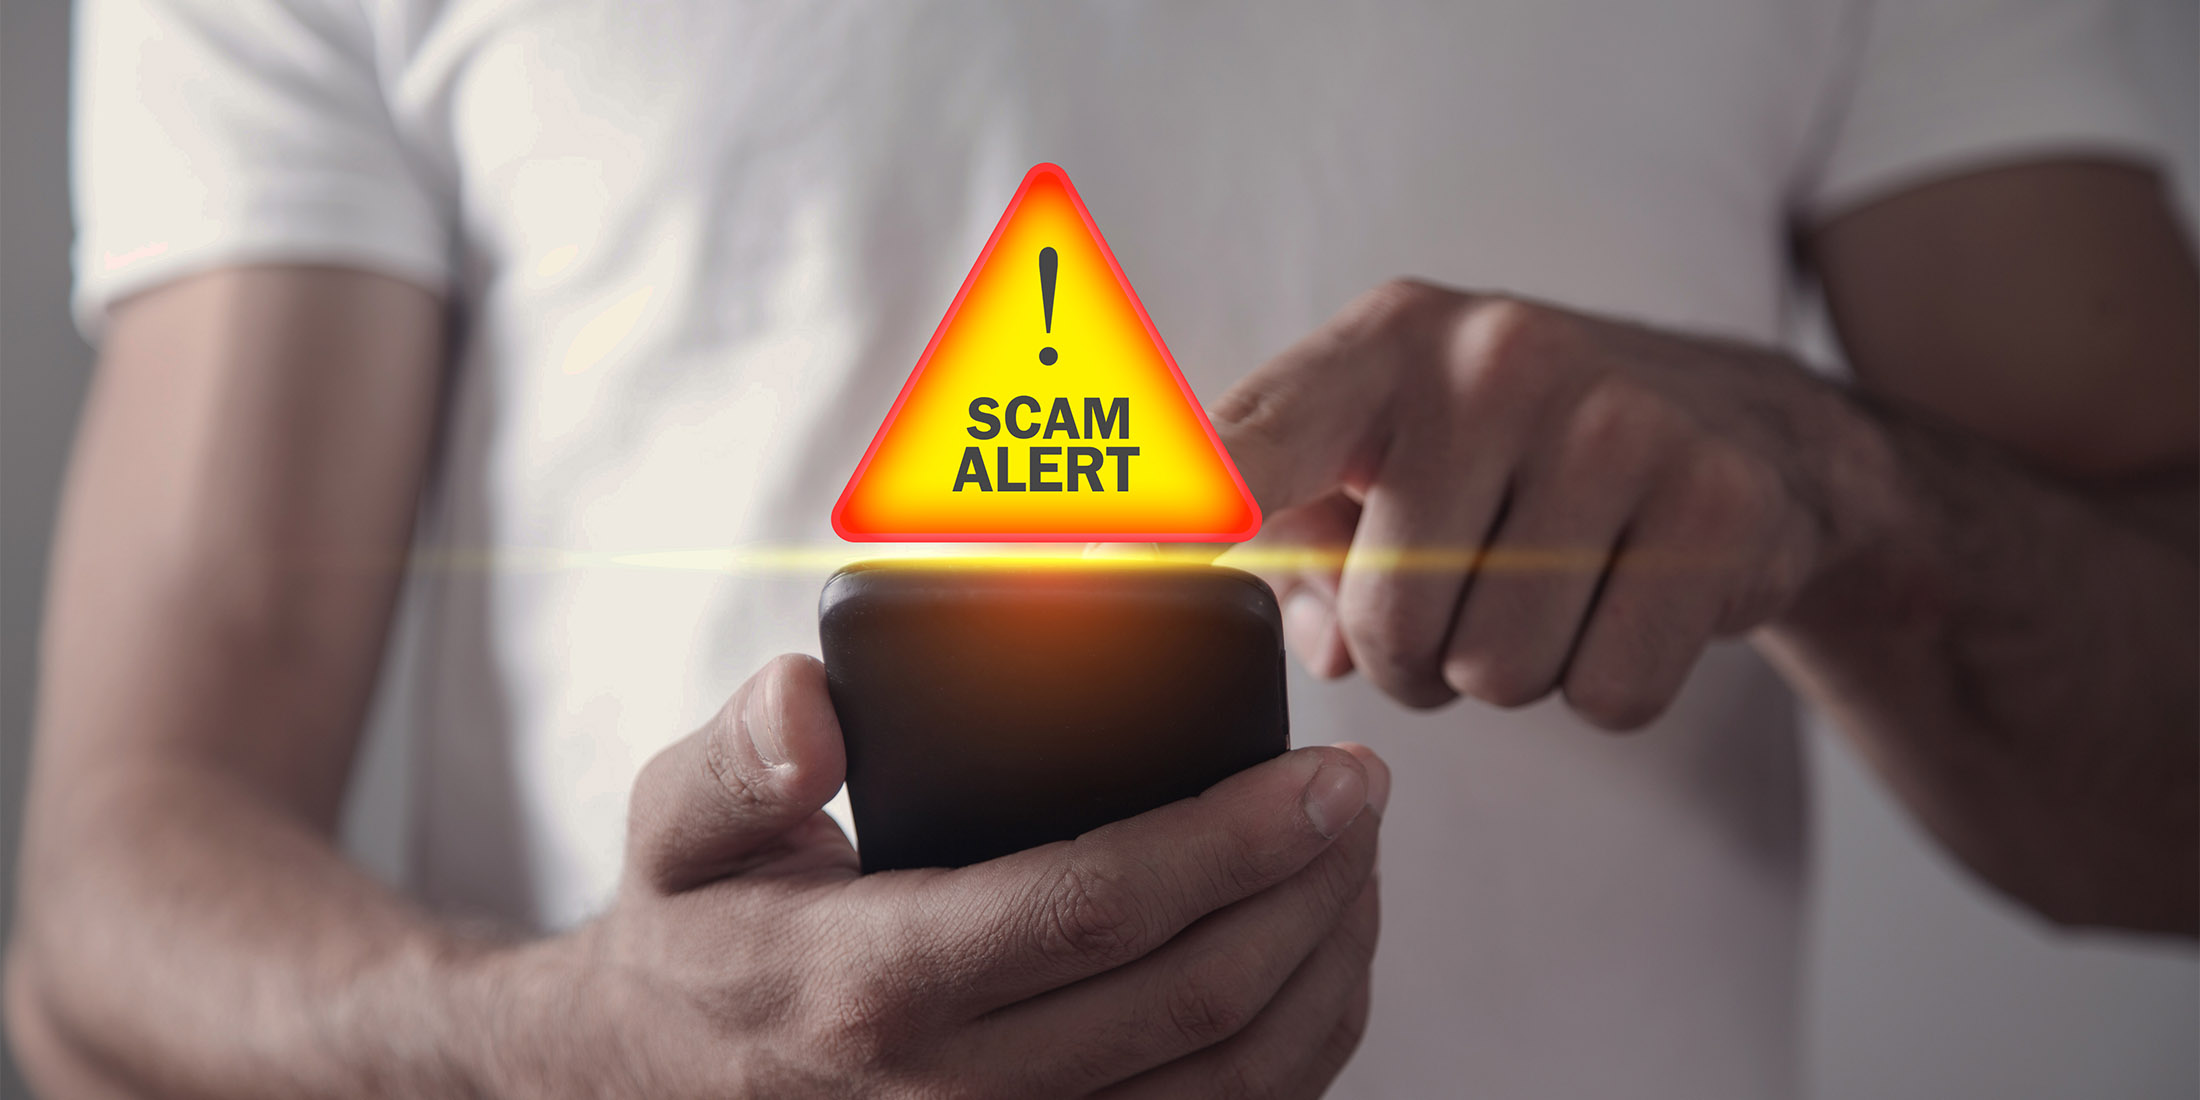 Delaware Justice system warns of phone scam targeting probationers